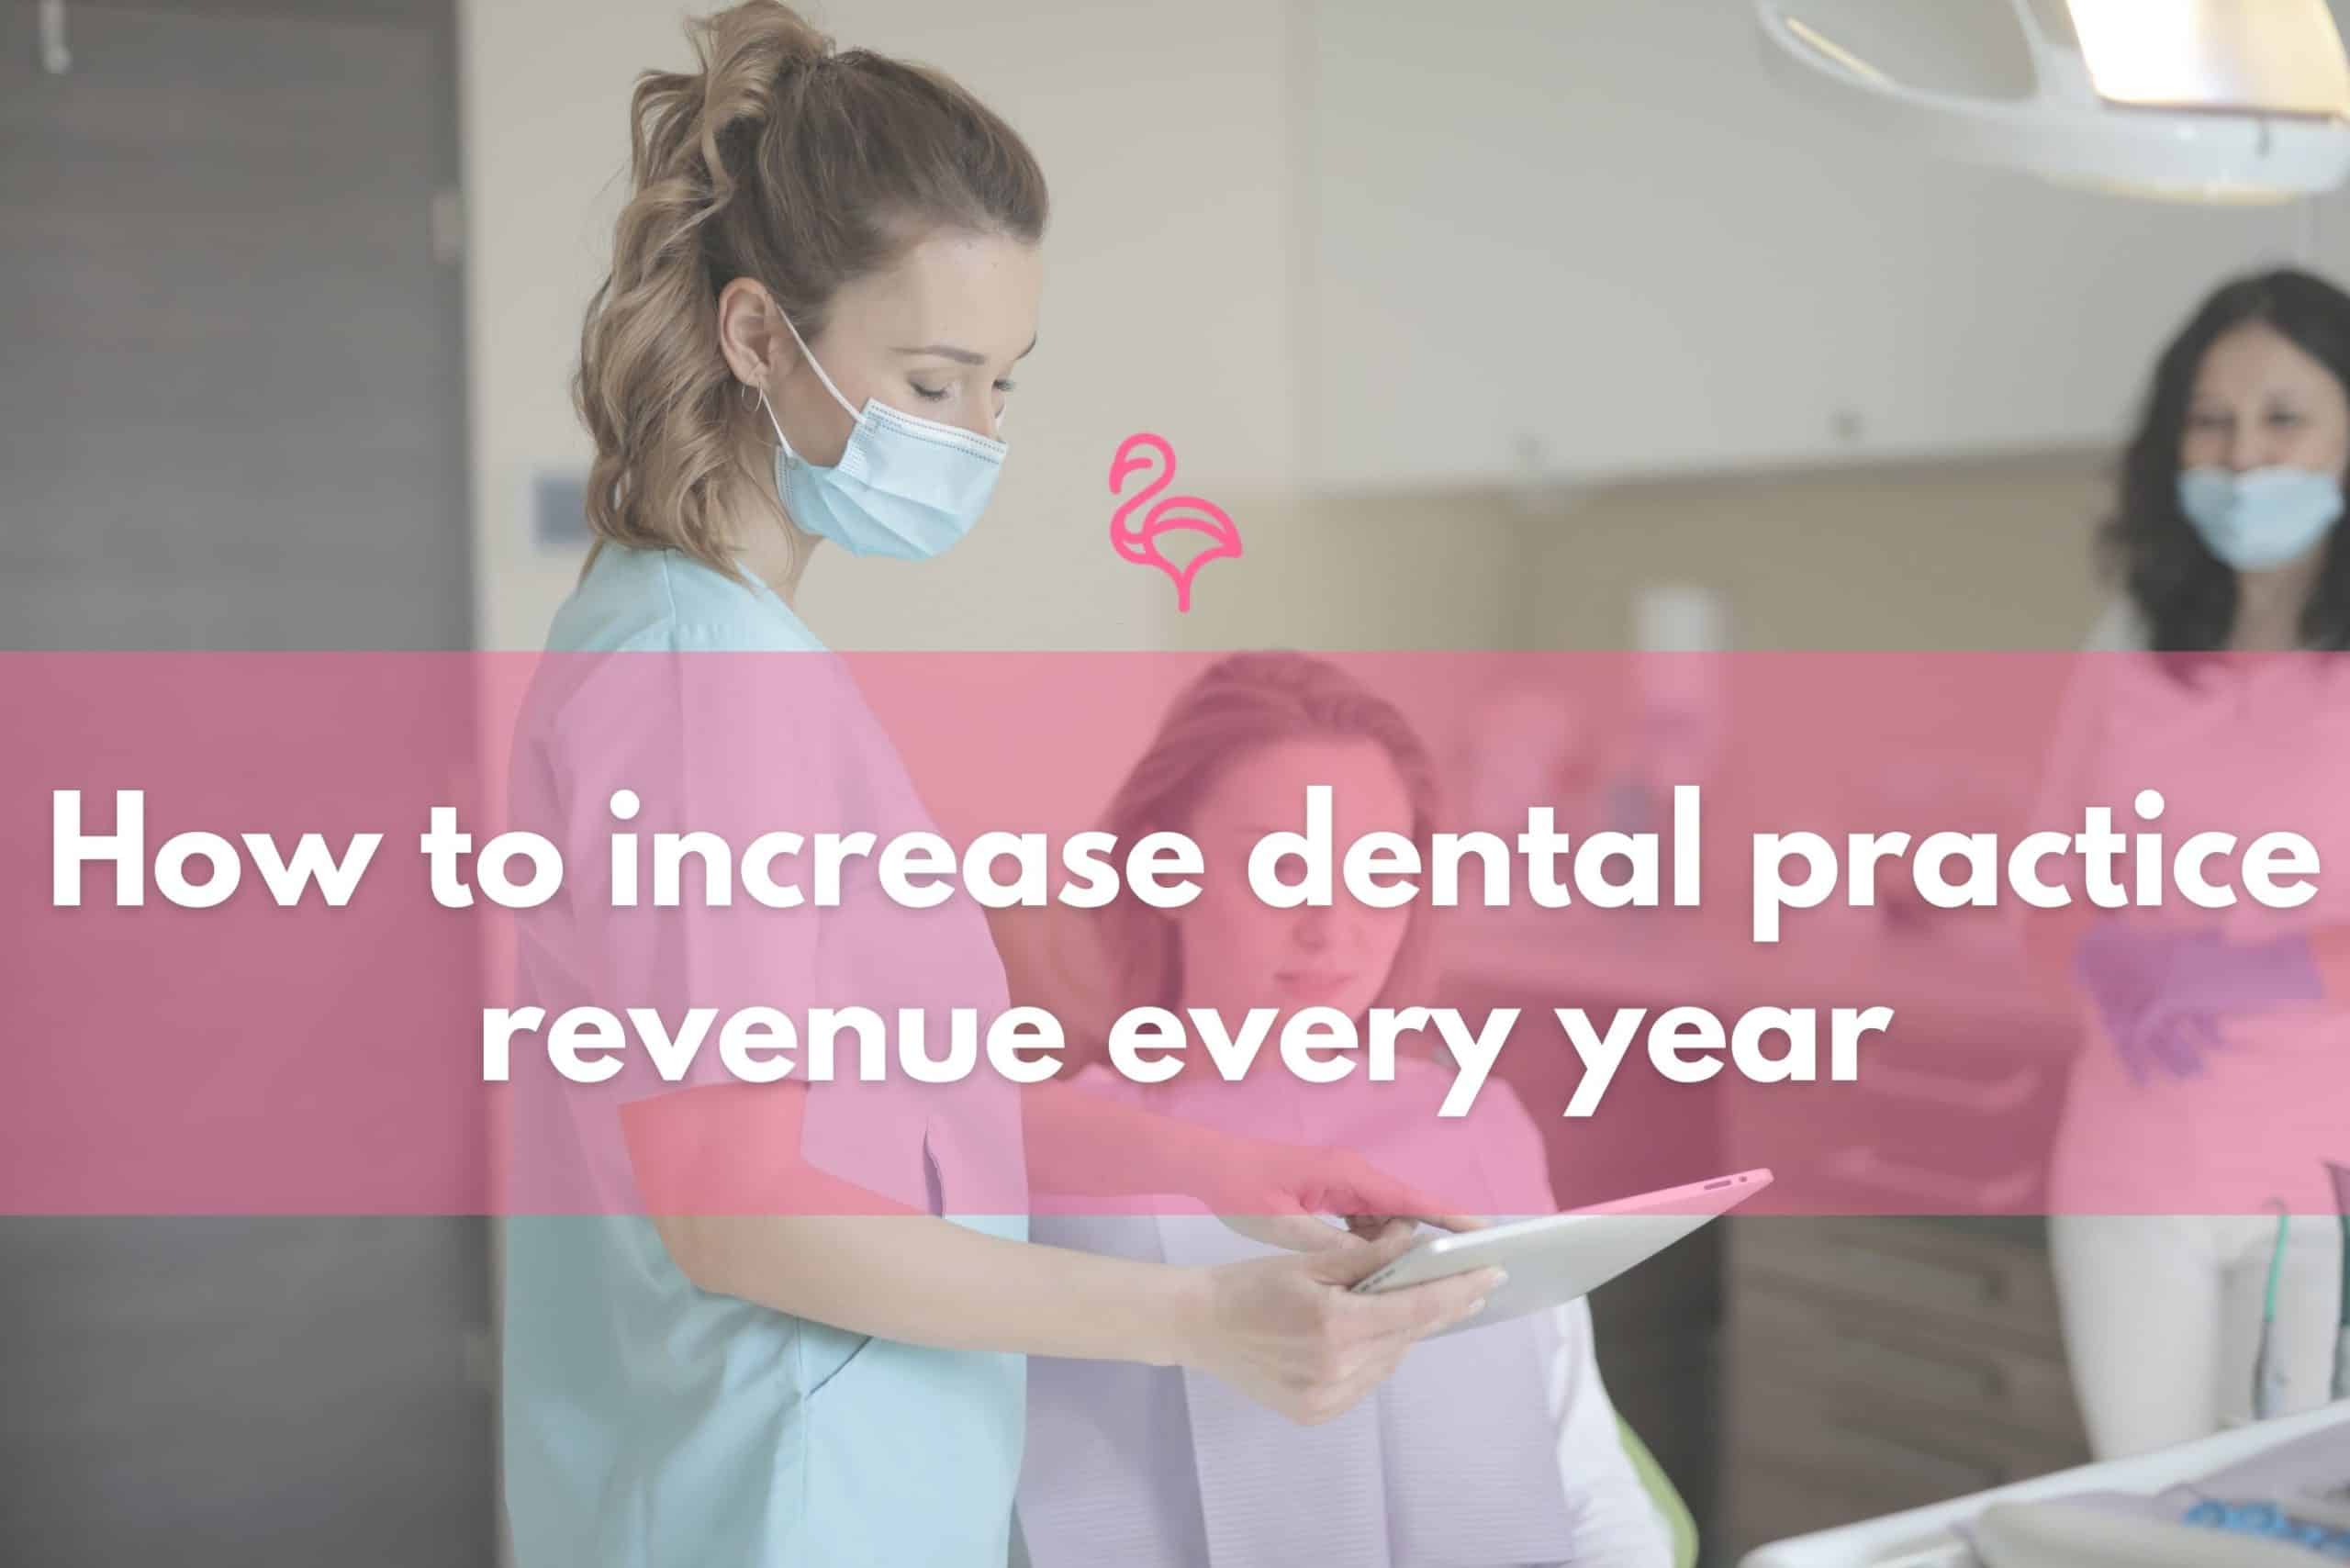 How to increase dental practice revenue every year